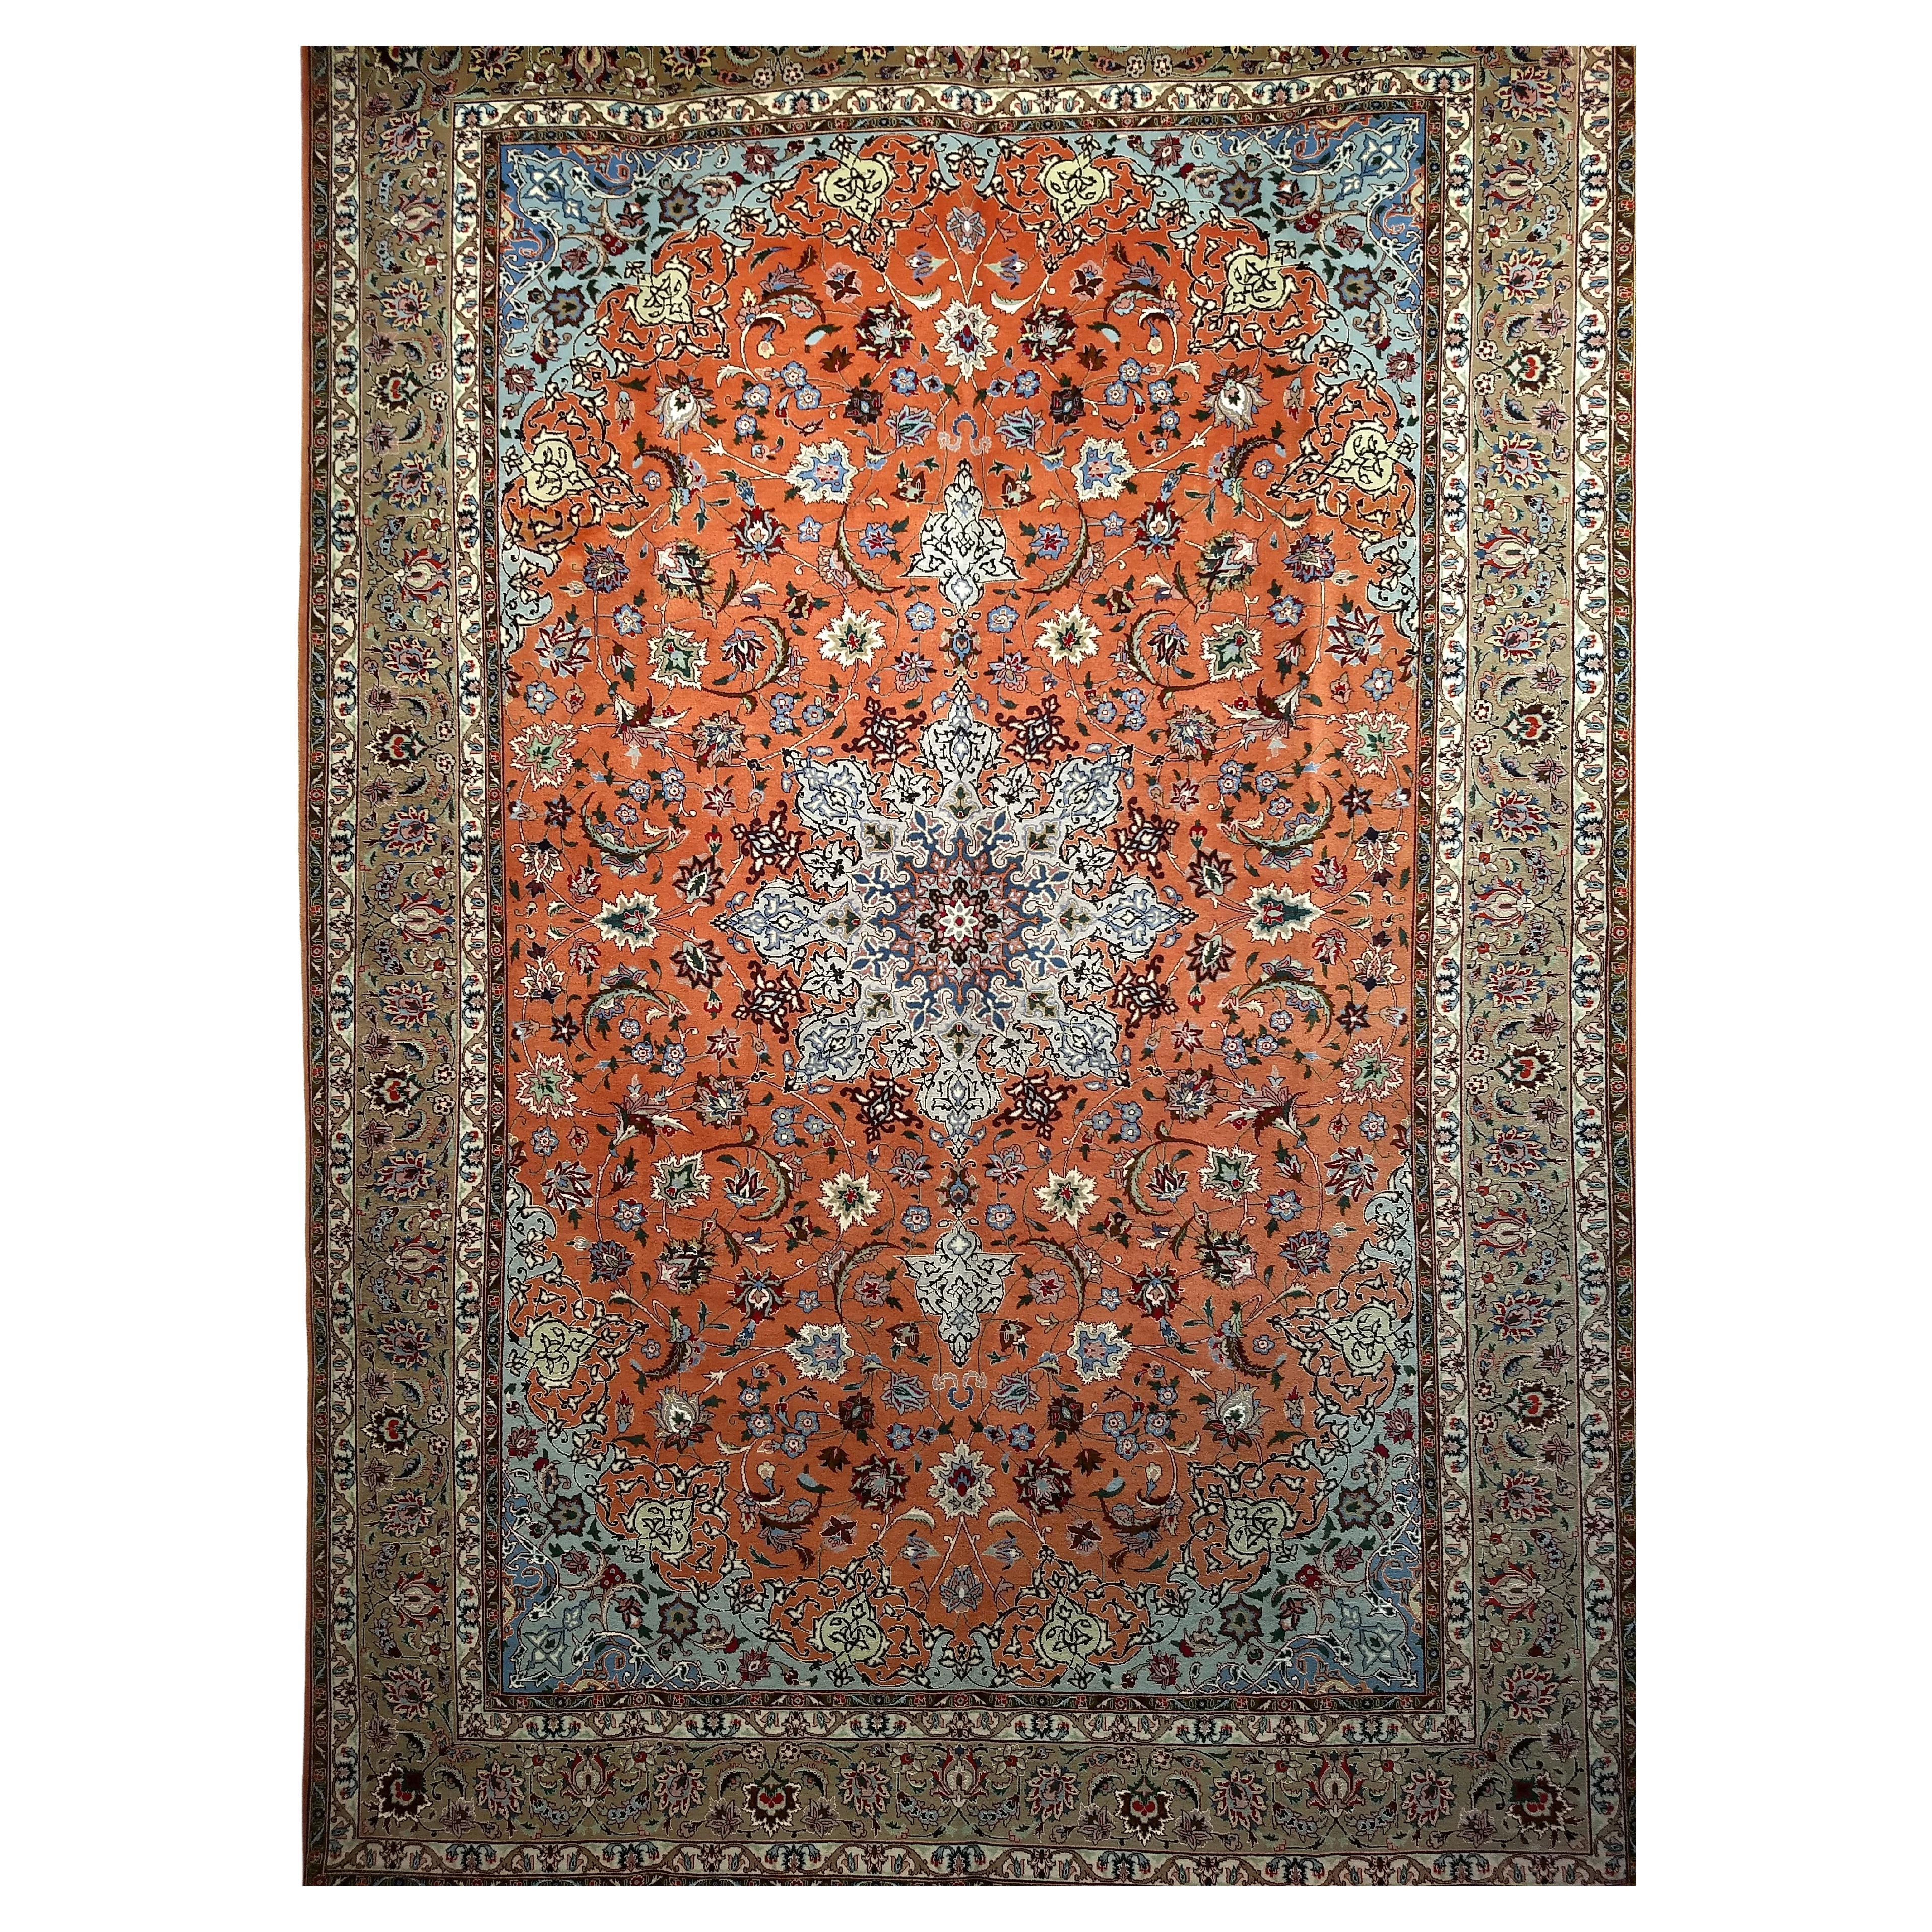 Fine Persian Tabriz in Floral Pattern with Silk  in Rust Red, Caramel, Baby Blue